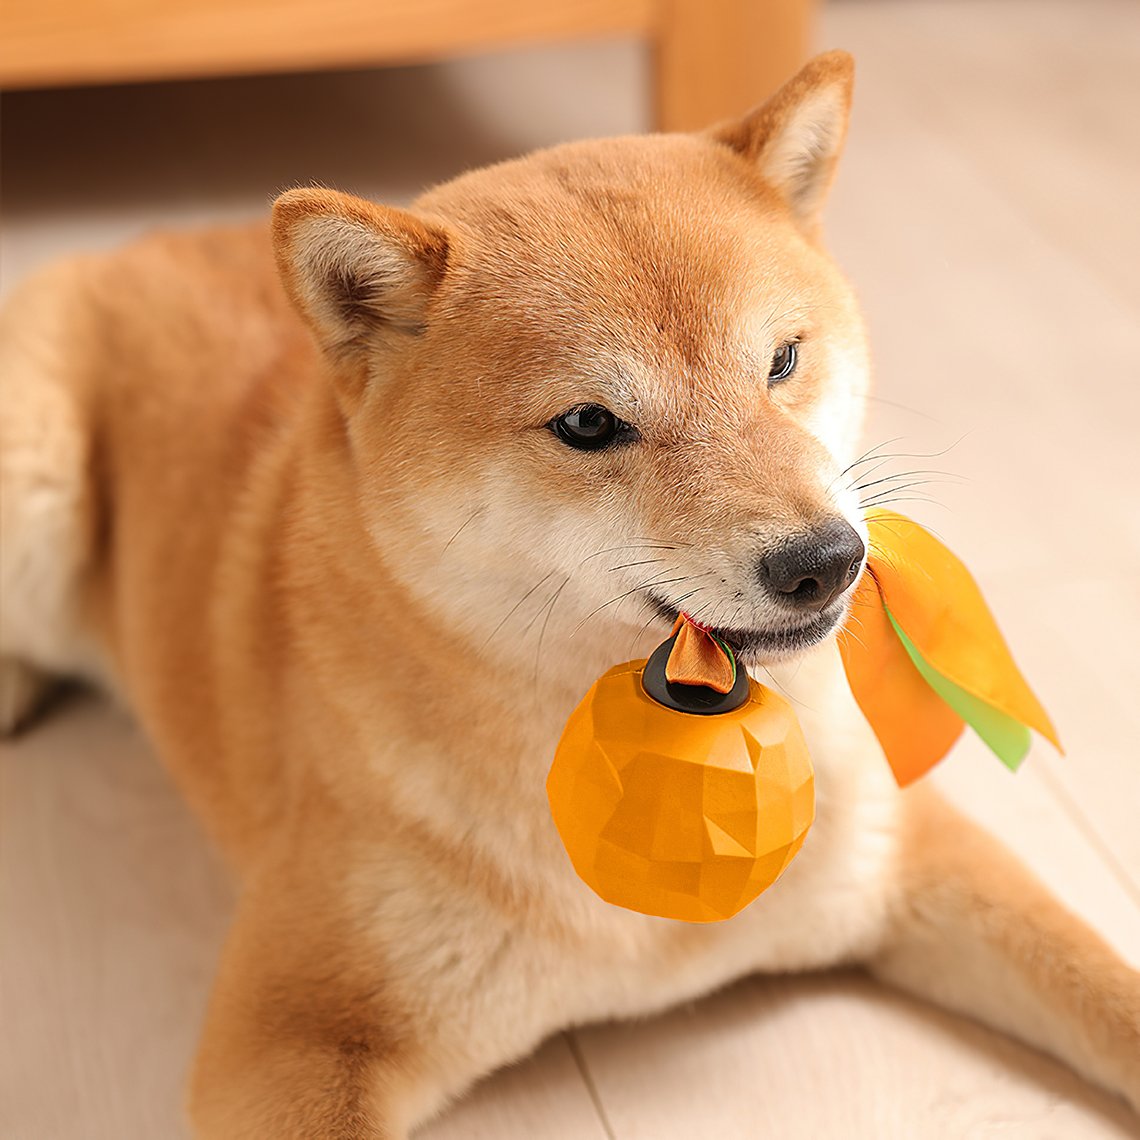 https://cdn.shopify.com/s/files/1/0549/1638/2879/products/fruit-shaped-squeaky-chew-toy-funnyfuzzy-726190.jpg?v=1701153238&width=1140